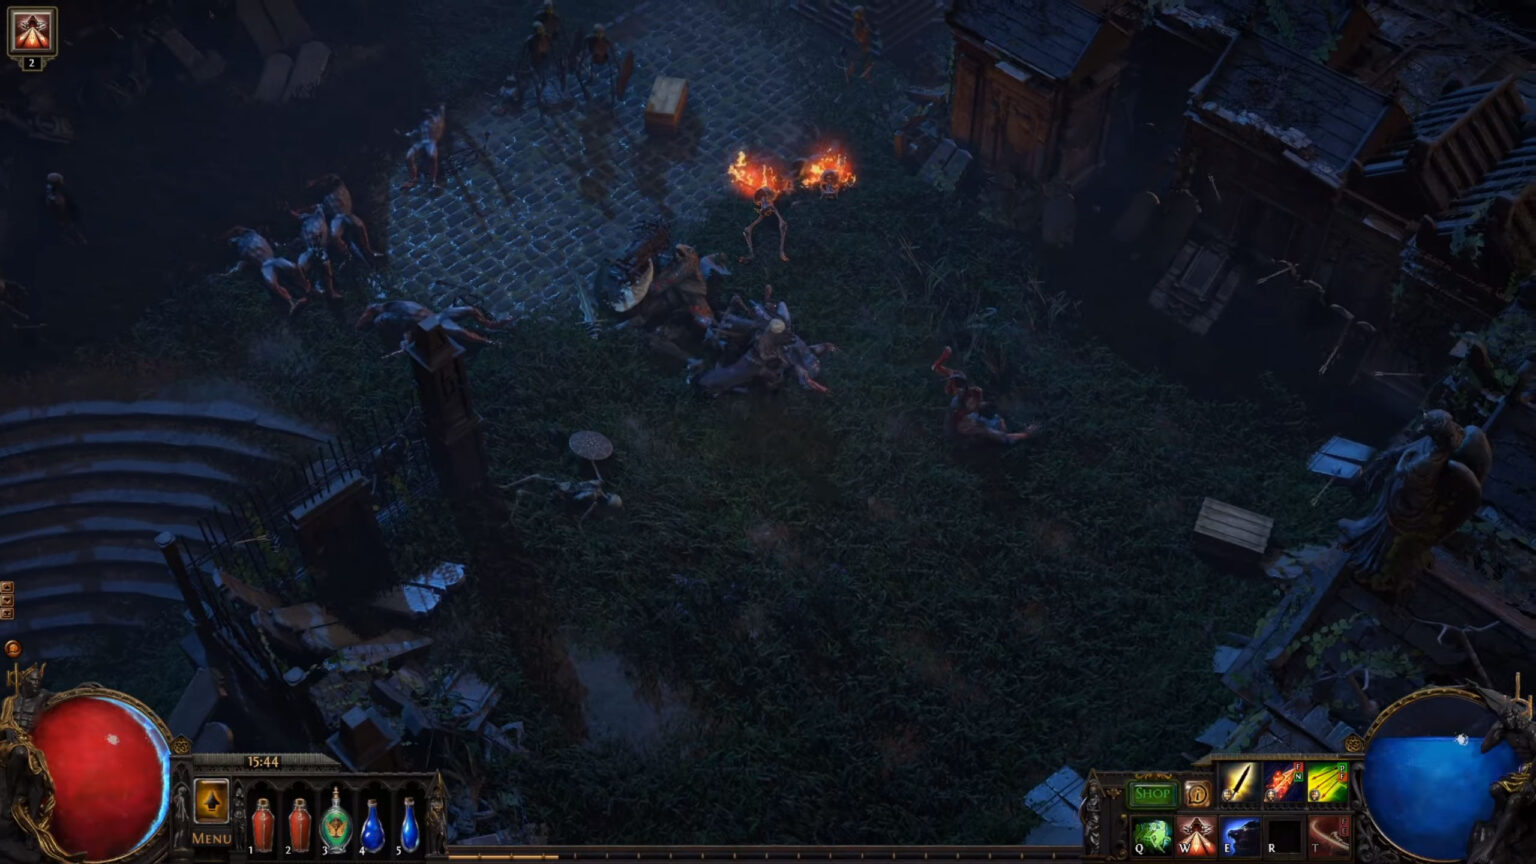 steam path of exile 2